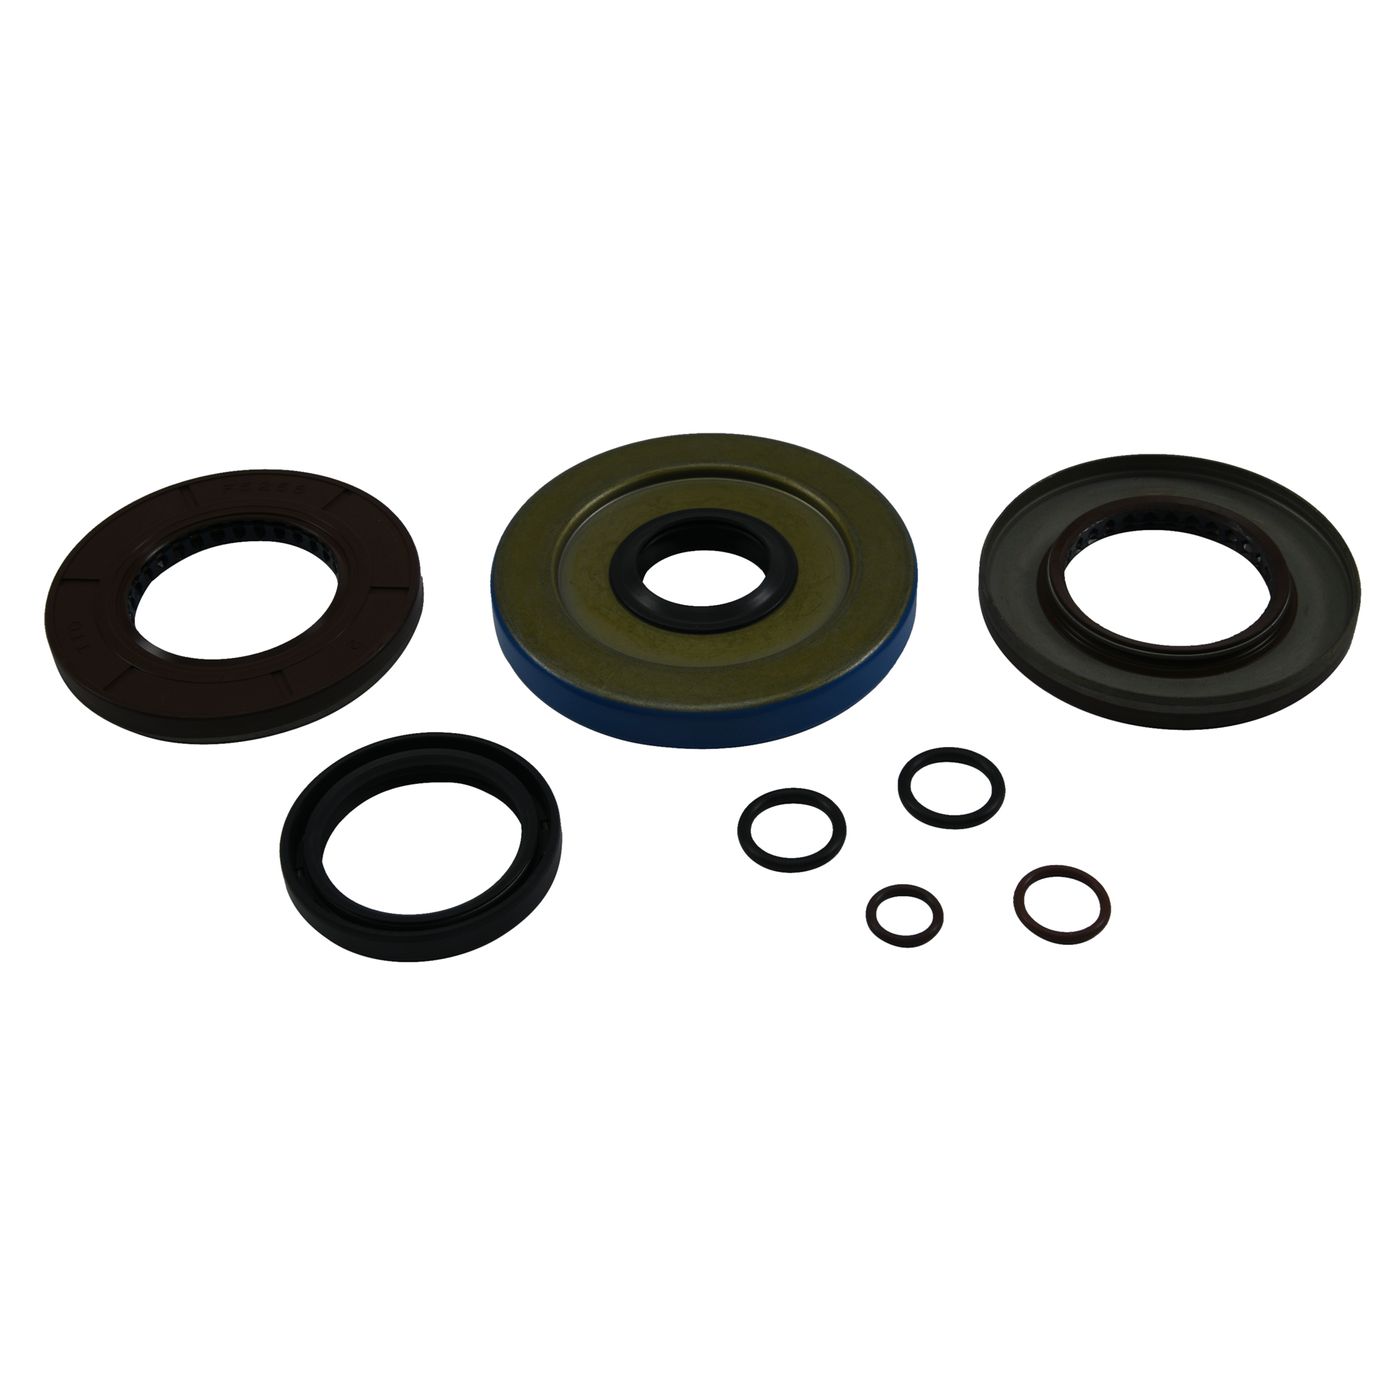 Wrp Diff Seal Kits - WRP252127-5 image